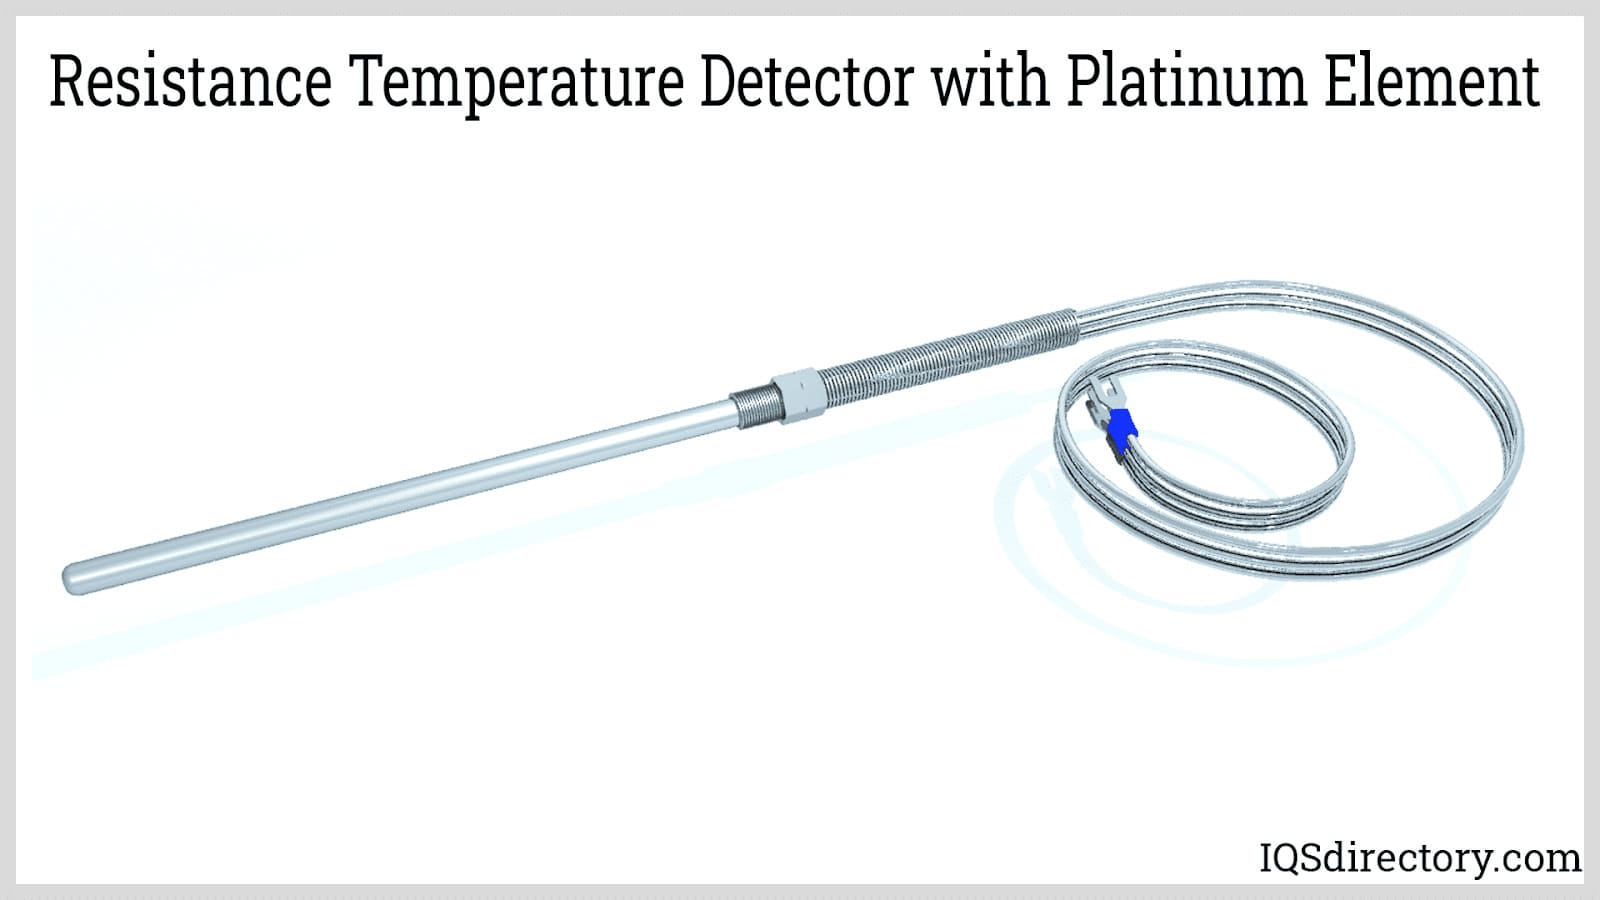 Water Temperature Sensors: Thermistors, thermocouples, RTDs